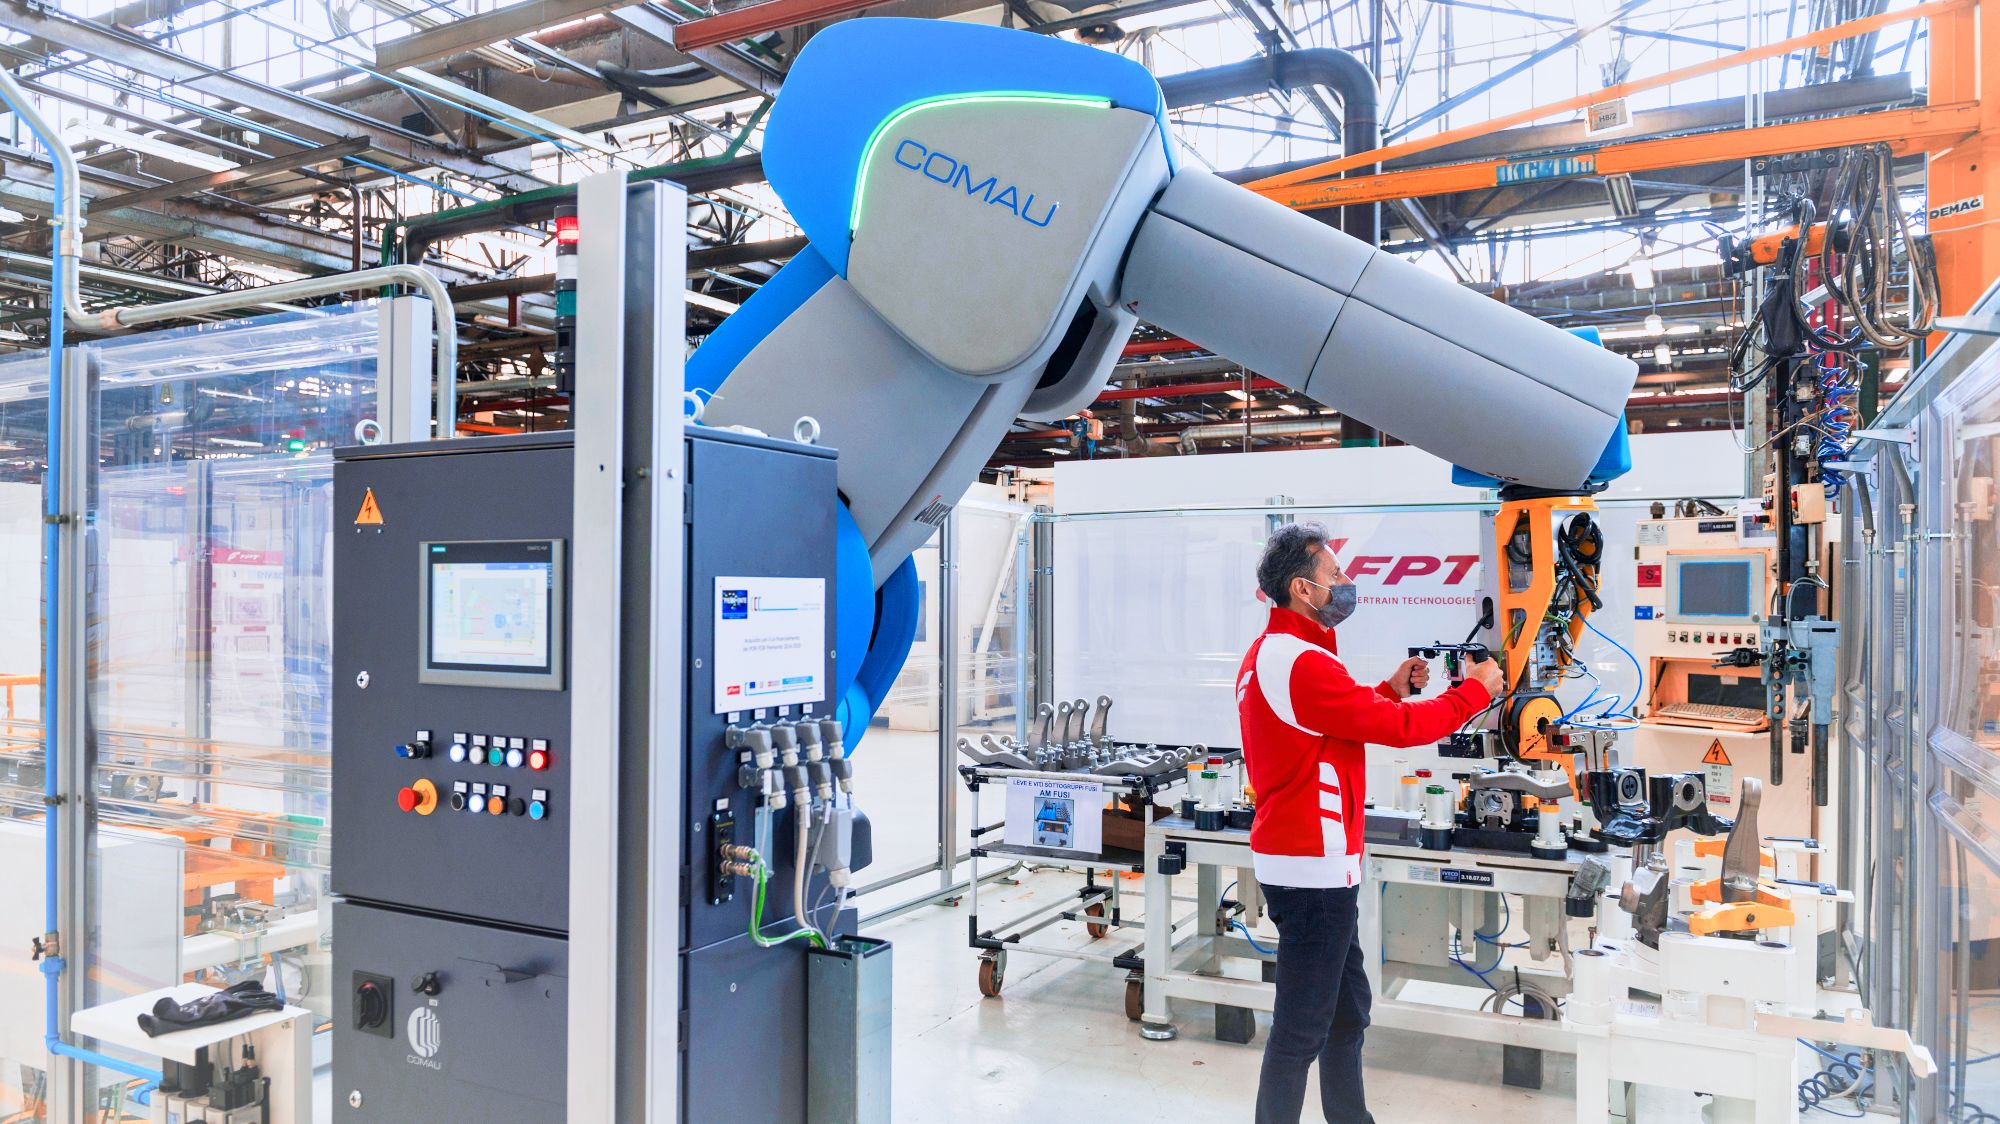 10 Industrial That Lead the - RoboDK blog